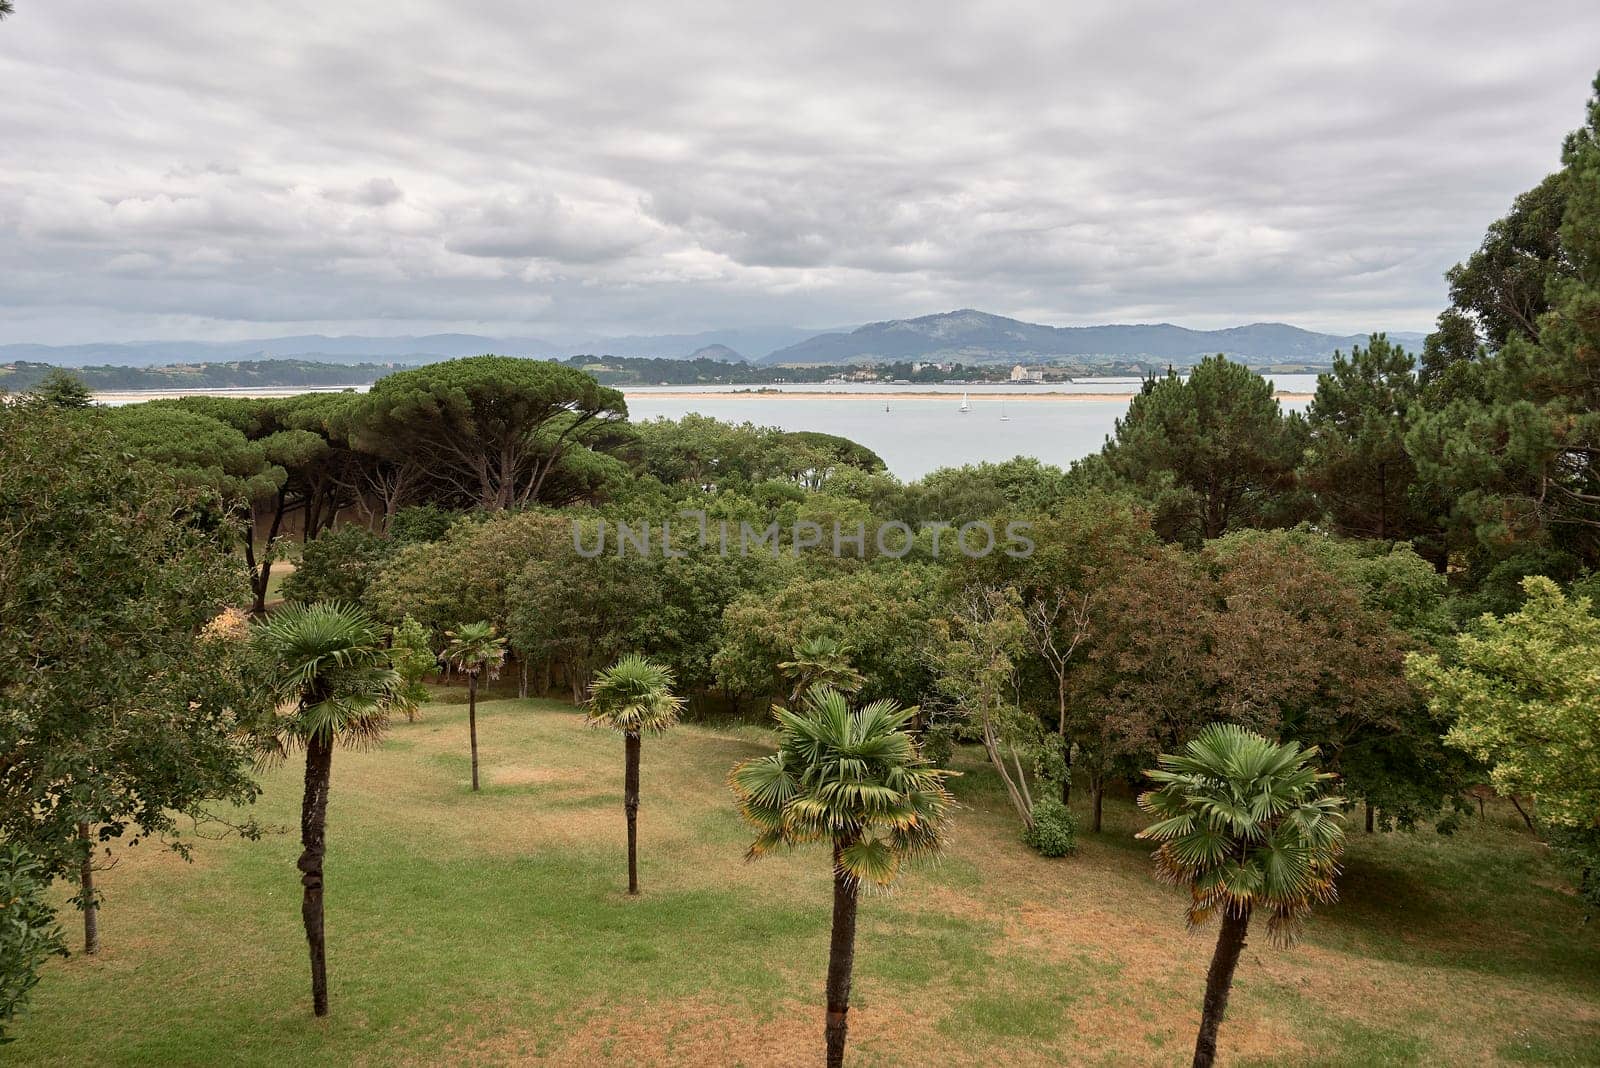 Santander Bay with boats on cloudy day. Close-up with trees and lush mountains, pine trees, sand,